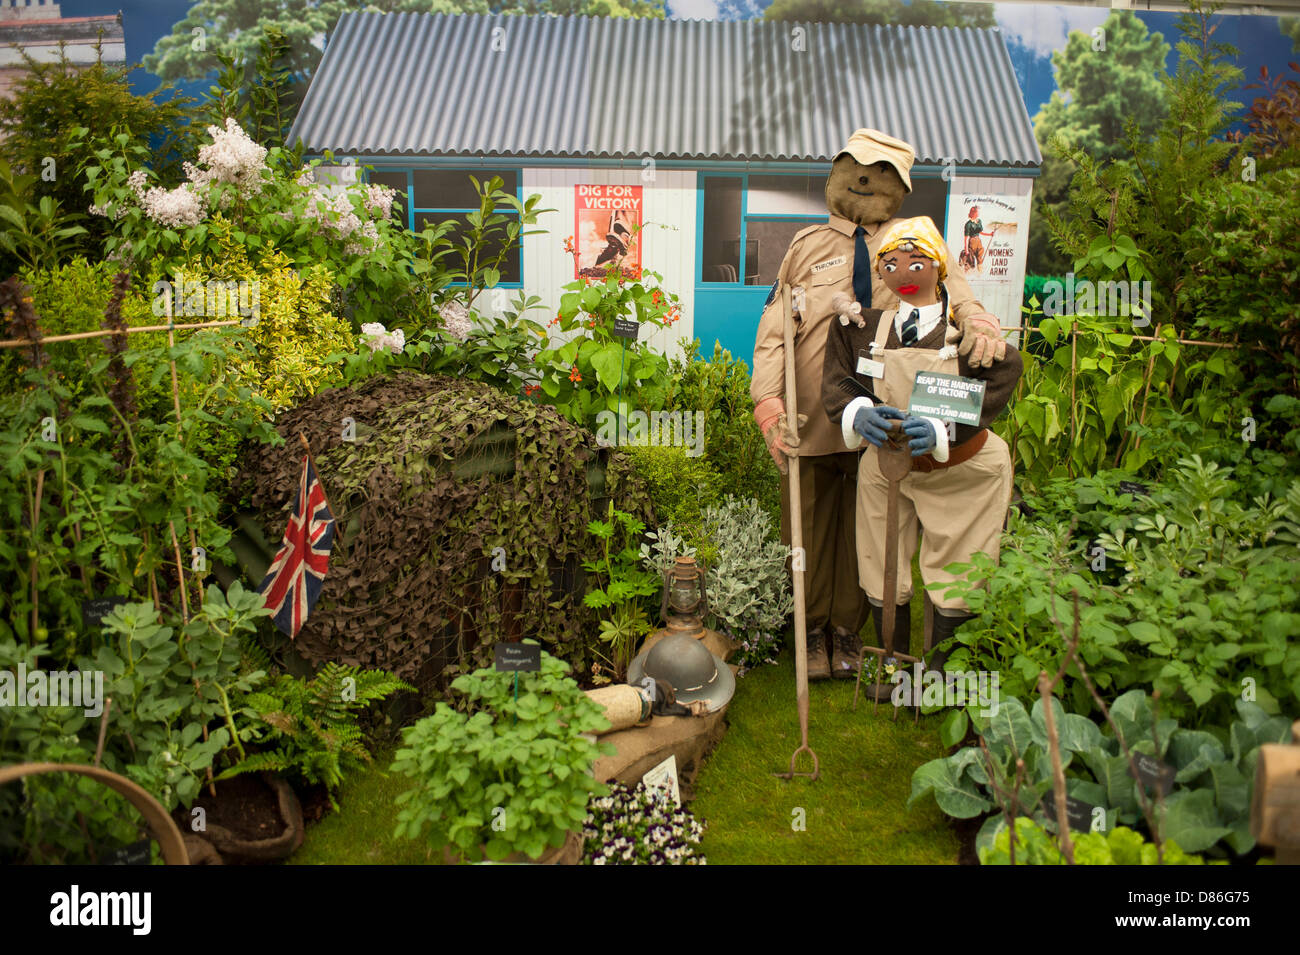 London, UK. 20th May, 2013. Miracle Gro’wers 1940s themed Dig For Victory stand at the RHS Chelsea Flower Show. Credit: Malcolm Park/Alamy Live News Stock Photo